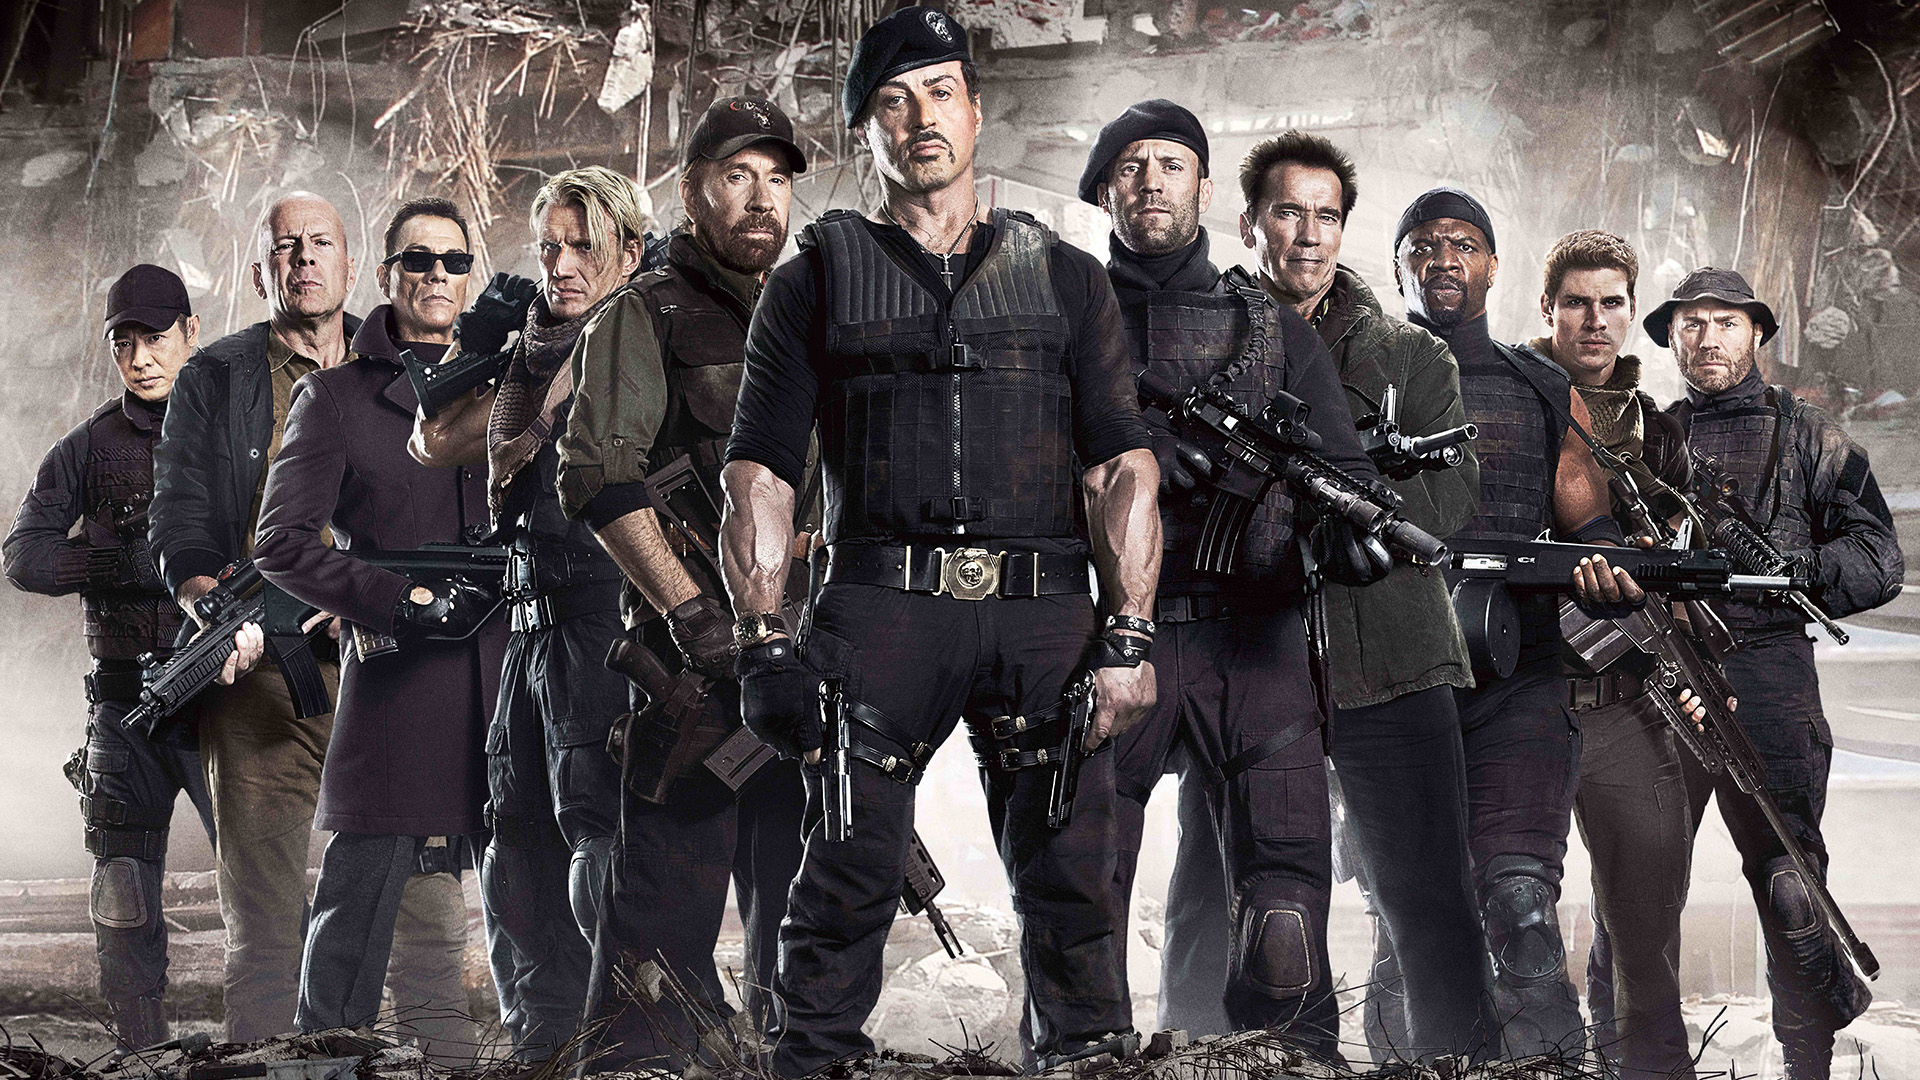 movie, the expendables 2, arnold schwarzenegger, barney ross, billy (the expendables), booker (the expendables), bruce willis, chuck norris, church (the expendables), dolph lundgren, gunnar jensen, hale caesar, jason statham, jean claude van damme, jet li, lee christmas, liam hemsworth, maggie (the expendables), randy couture, sylvester stallone, terry crews, toll road, trench (the expendables), vilain (the expendables), yin yang (the expendables), the expendables wallpapers for tablet